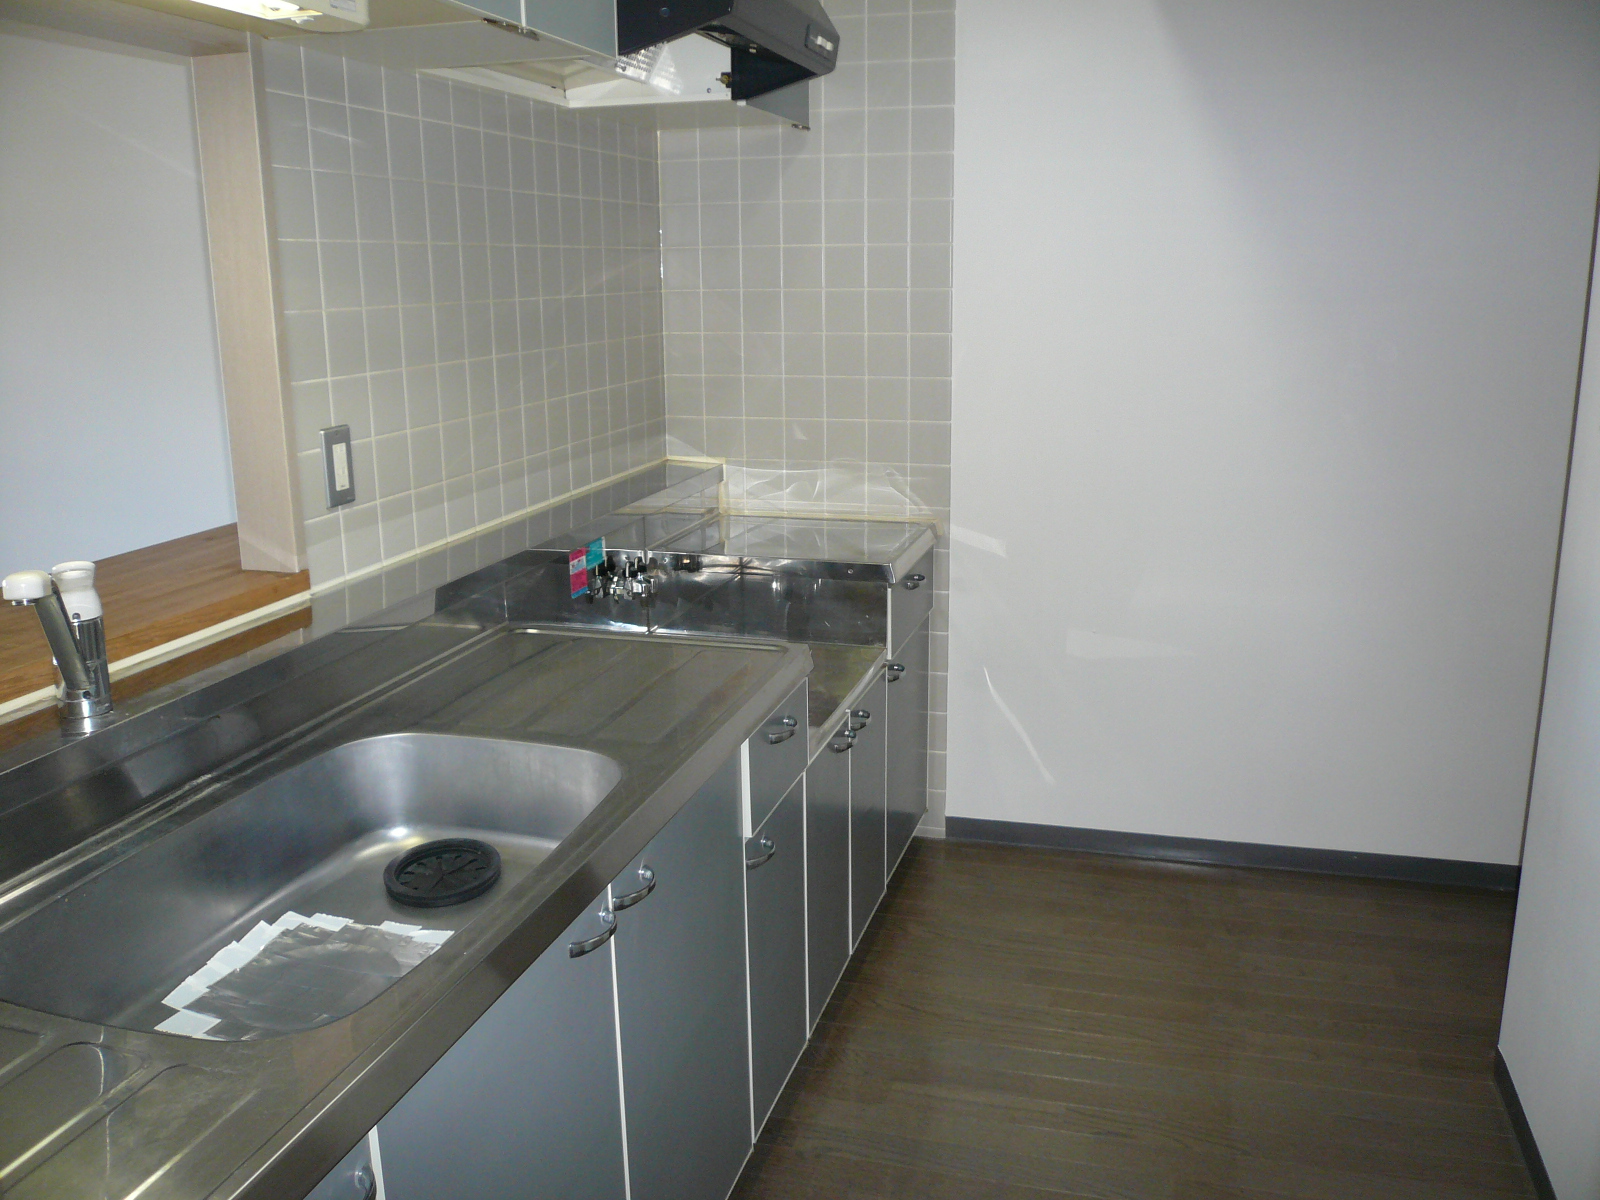 Kitchen. kitchen  The same type ・ It will be in a separate dwelling unit photos.